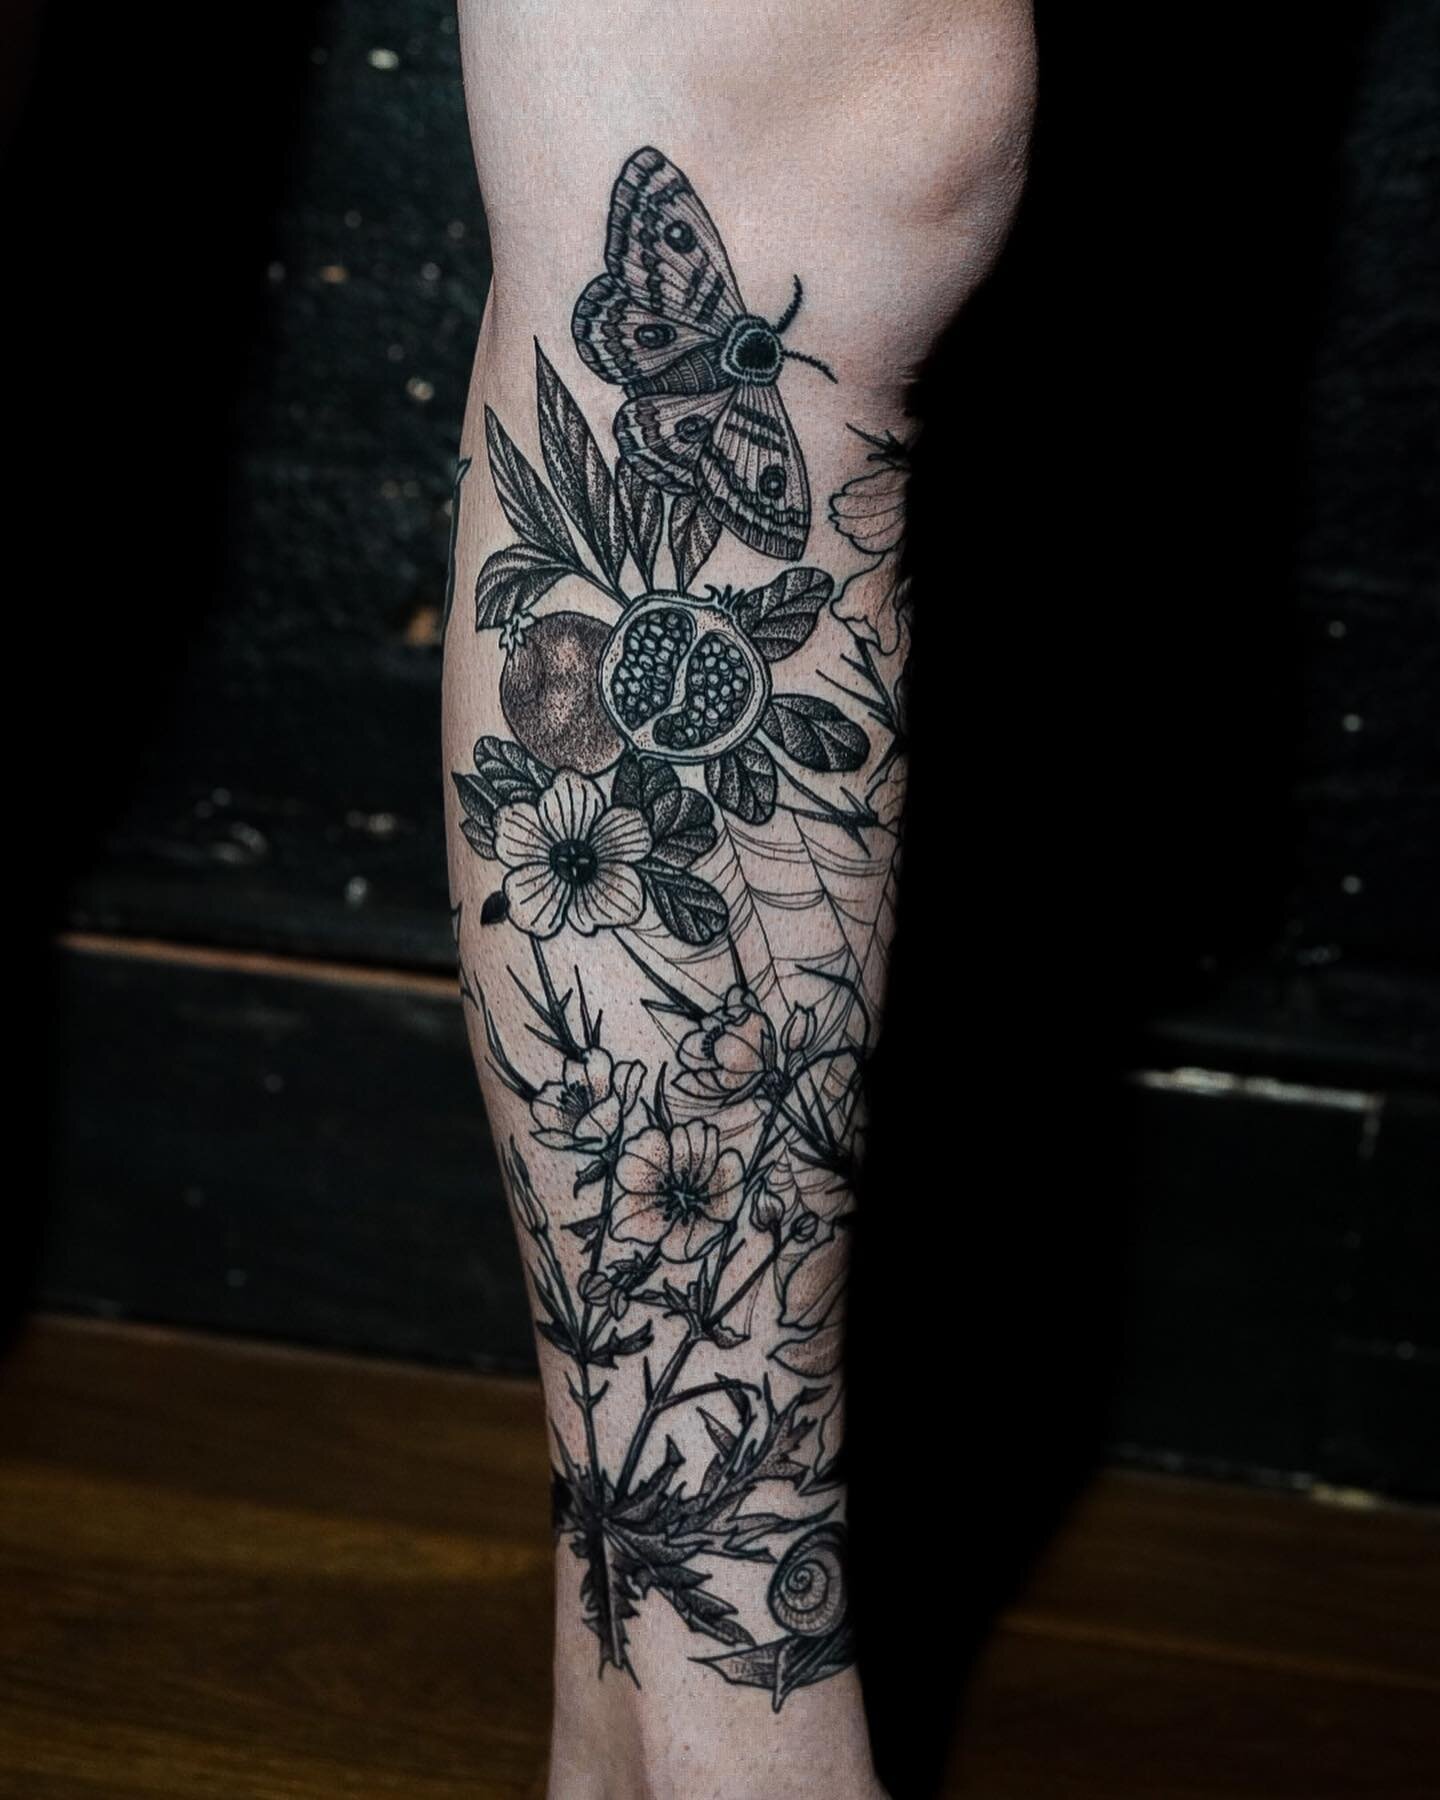 Aster wanted a half leg sleeve to contrast with their other leg, so we made it intricate, lush and  dark. Thank you for your trust, Aster!
(Swipe for video!)
&bull;
&bull;
#tt #tattoo #hiralupe #latattoo #nytattoo #blackworkers #botanicaltattoo #dark